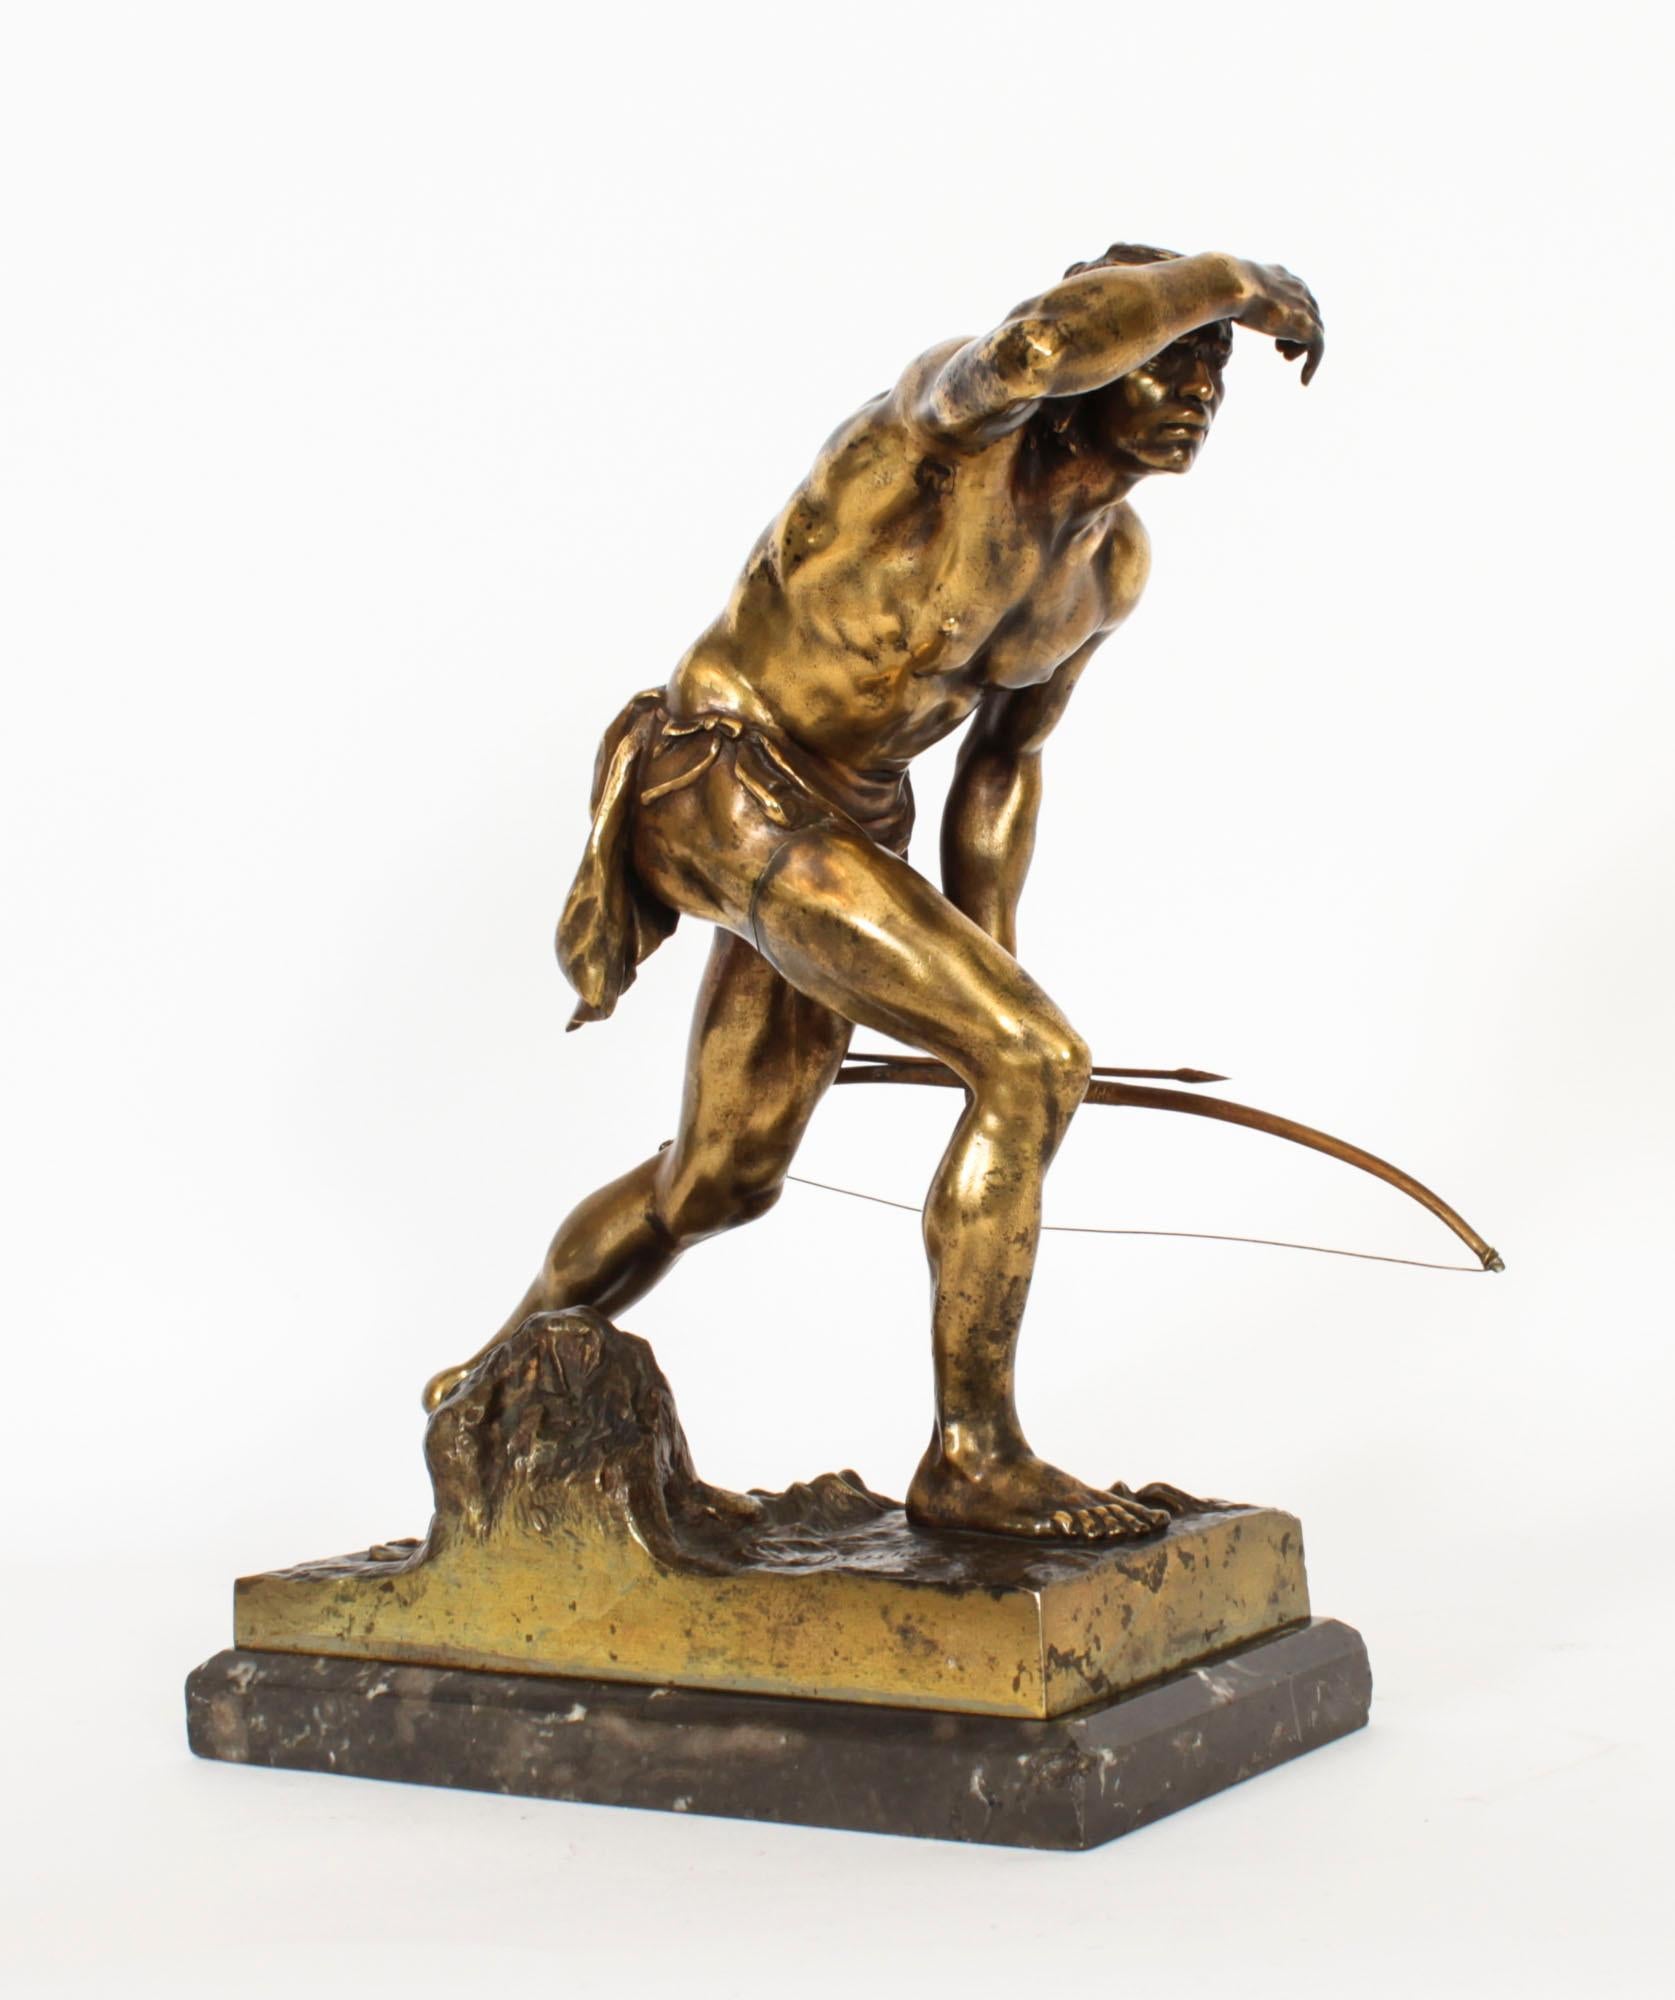 This is a antique gilt bronze figural sculpture of Indian Scout holding a bow & arrow, by the renowned German sculptor Josef Drischler (1838 - 1917) and bearng his signature,  circa 1900 in date, please see the oval photograph of the sculptor.


The